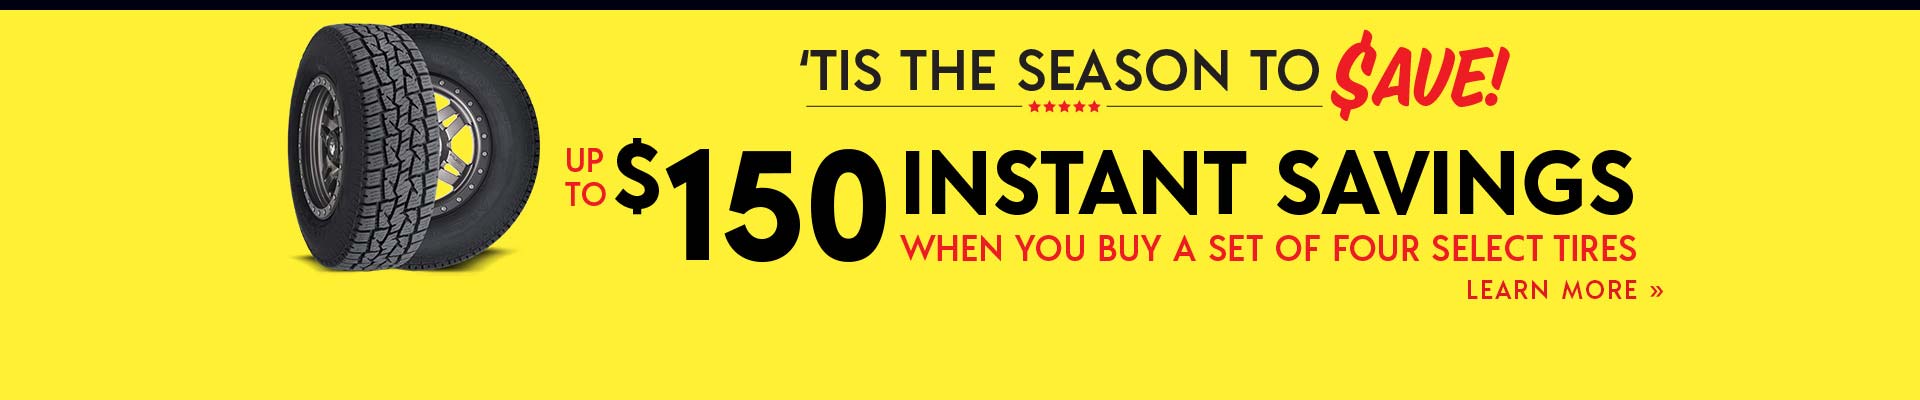 Up to $150 Instant Savings